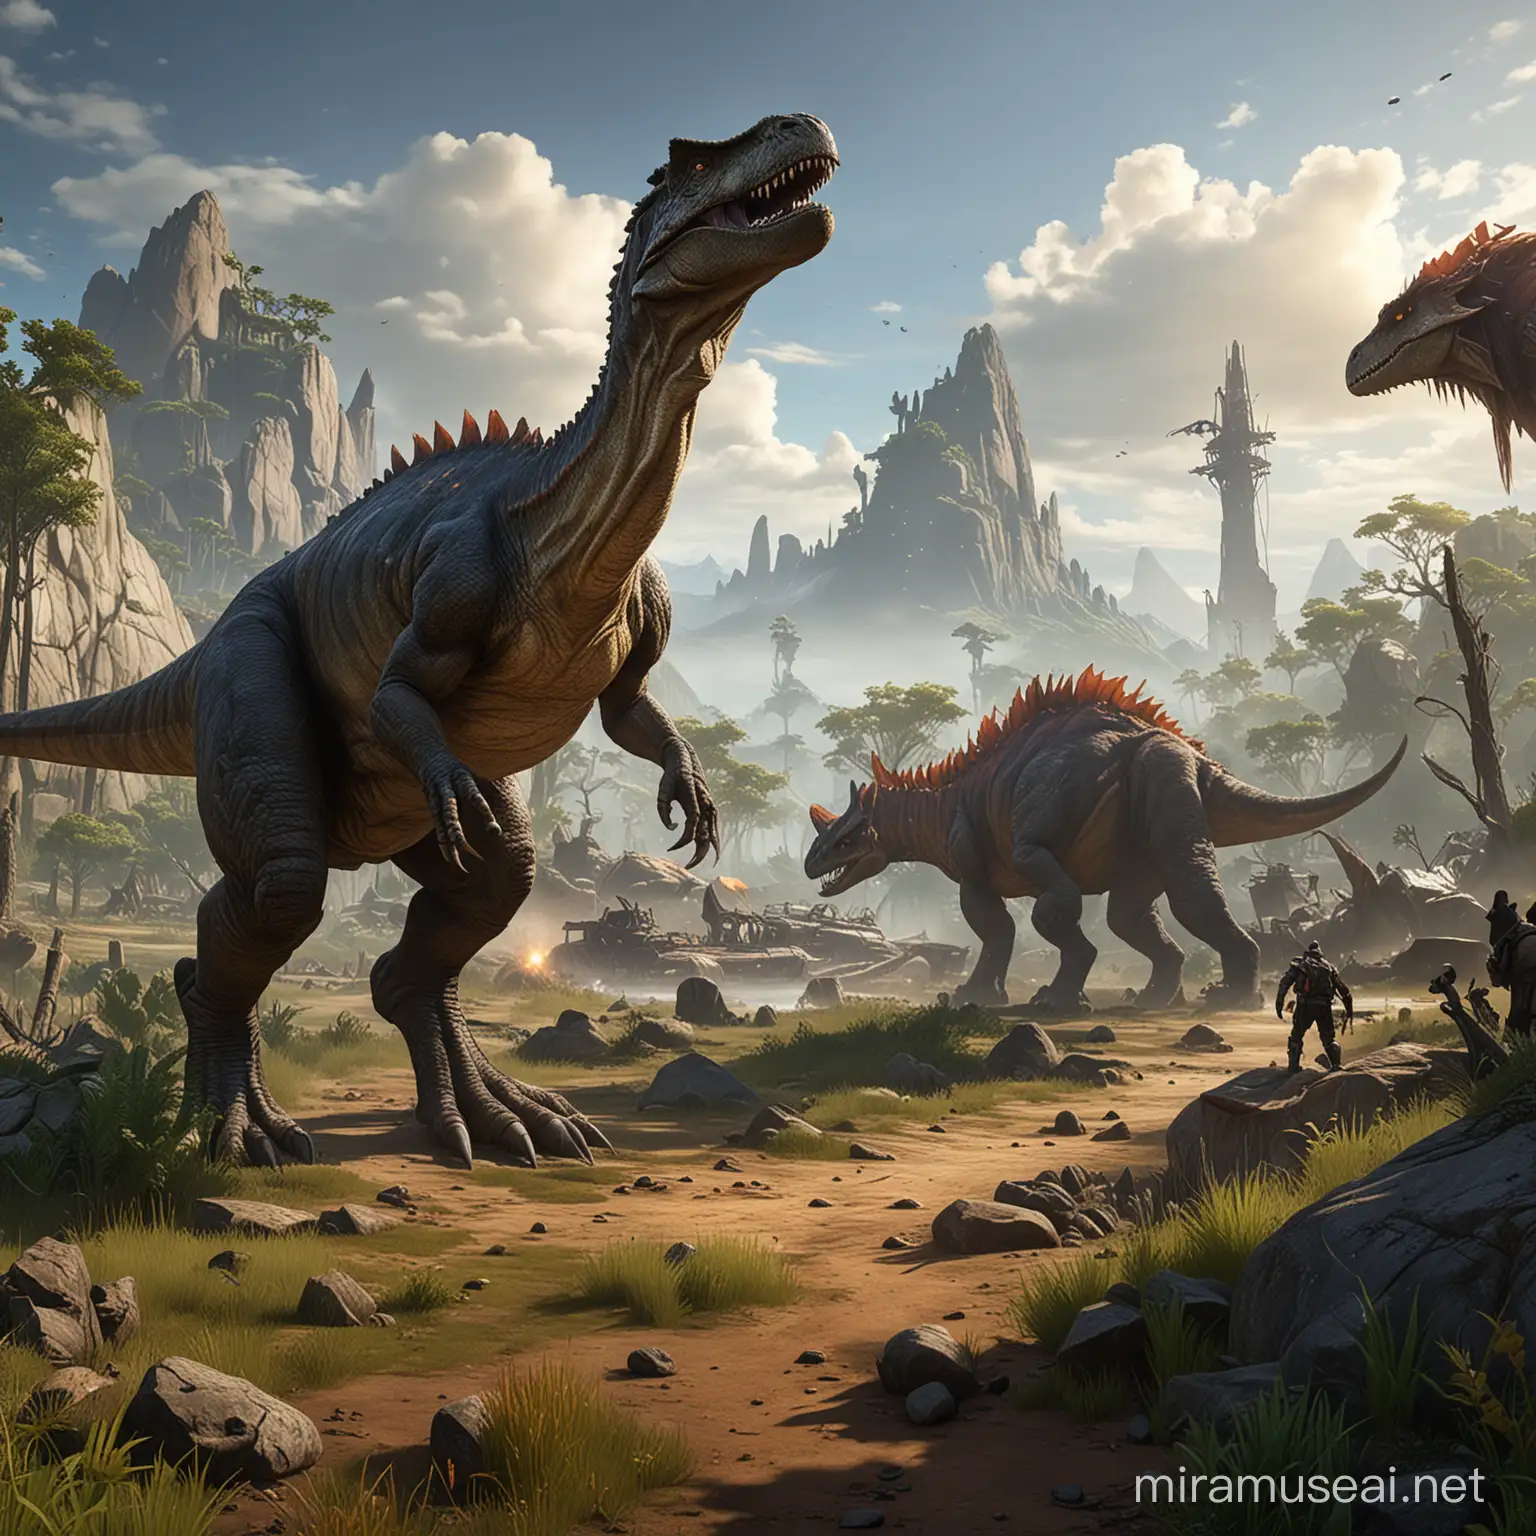 Create an image that combines elements from the games 'ARK: Survival Evolved', 'DayZ', and 'World of Warcraft'. Imagine a scene where the prehistoric world of ARK, with its dinosaurs and wild landscapes, merges with the post-apocalyptic survival environment of DayZ. Add to this the fantastical and mythical elements of World of Warcraft. The image should showcase a dynamic and unique blend of these three worlds. There might be a character in survival gear, reminiscent of DayZ, riding a dinosaur from ARK, in a landscape that has elements of the magical and mystical environments found in World of Warcraft. The scene should be a seamless integration of the survival, prehistoric, and fantasy themes from these games, creating a captivating and original world. The aspect ratio must be 1:1